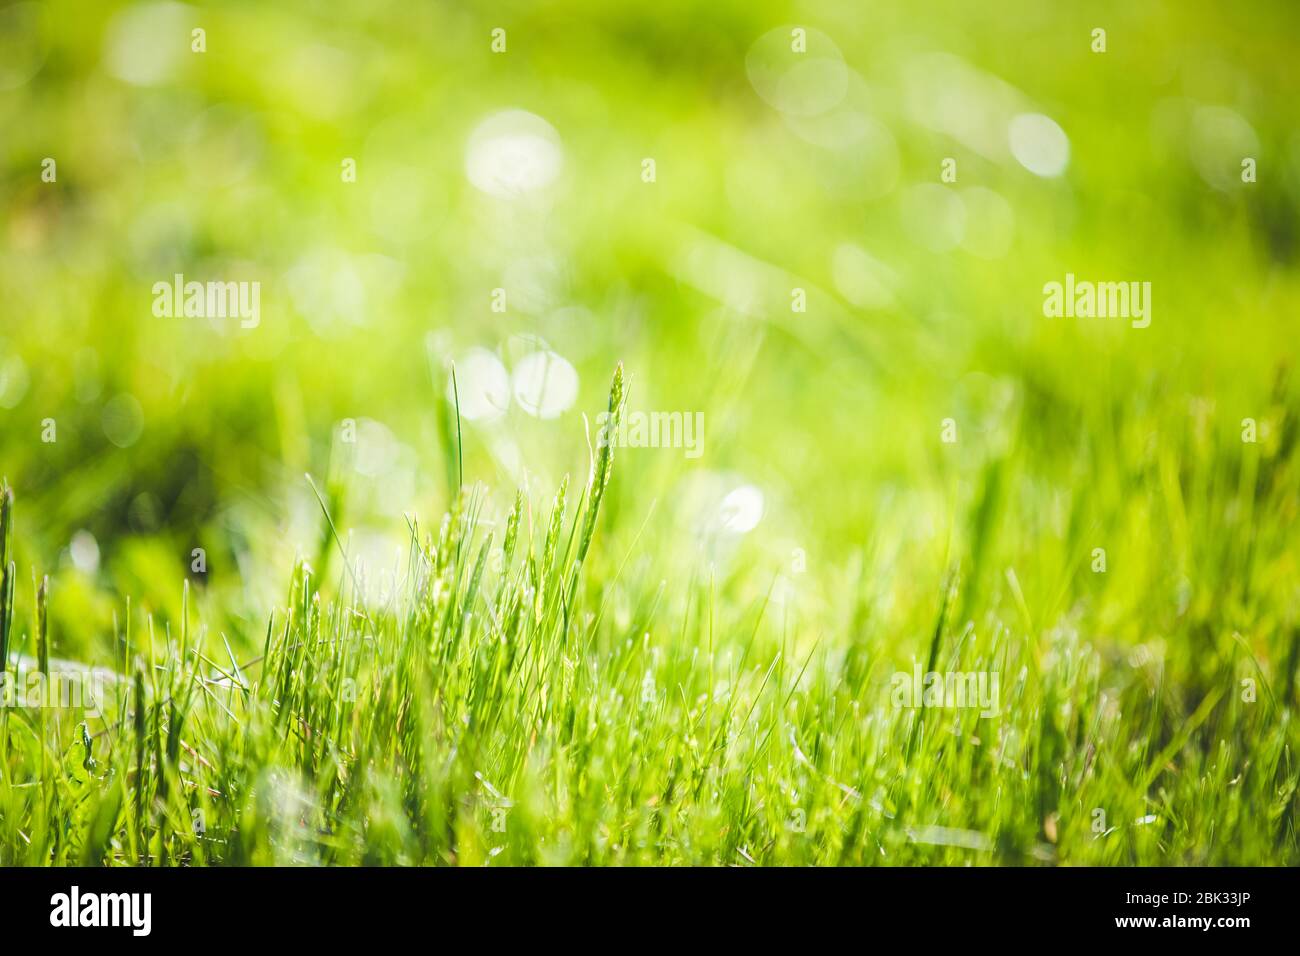 Fresh green grass abstract background Stock Photo